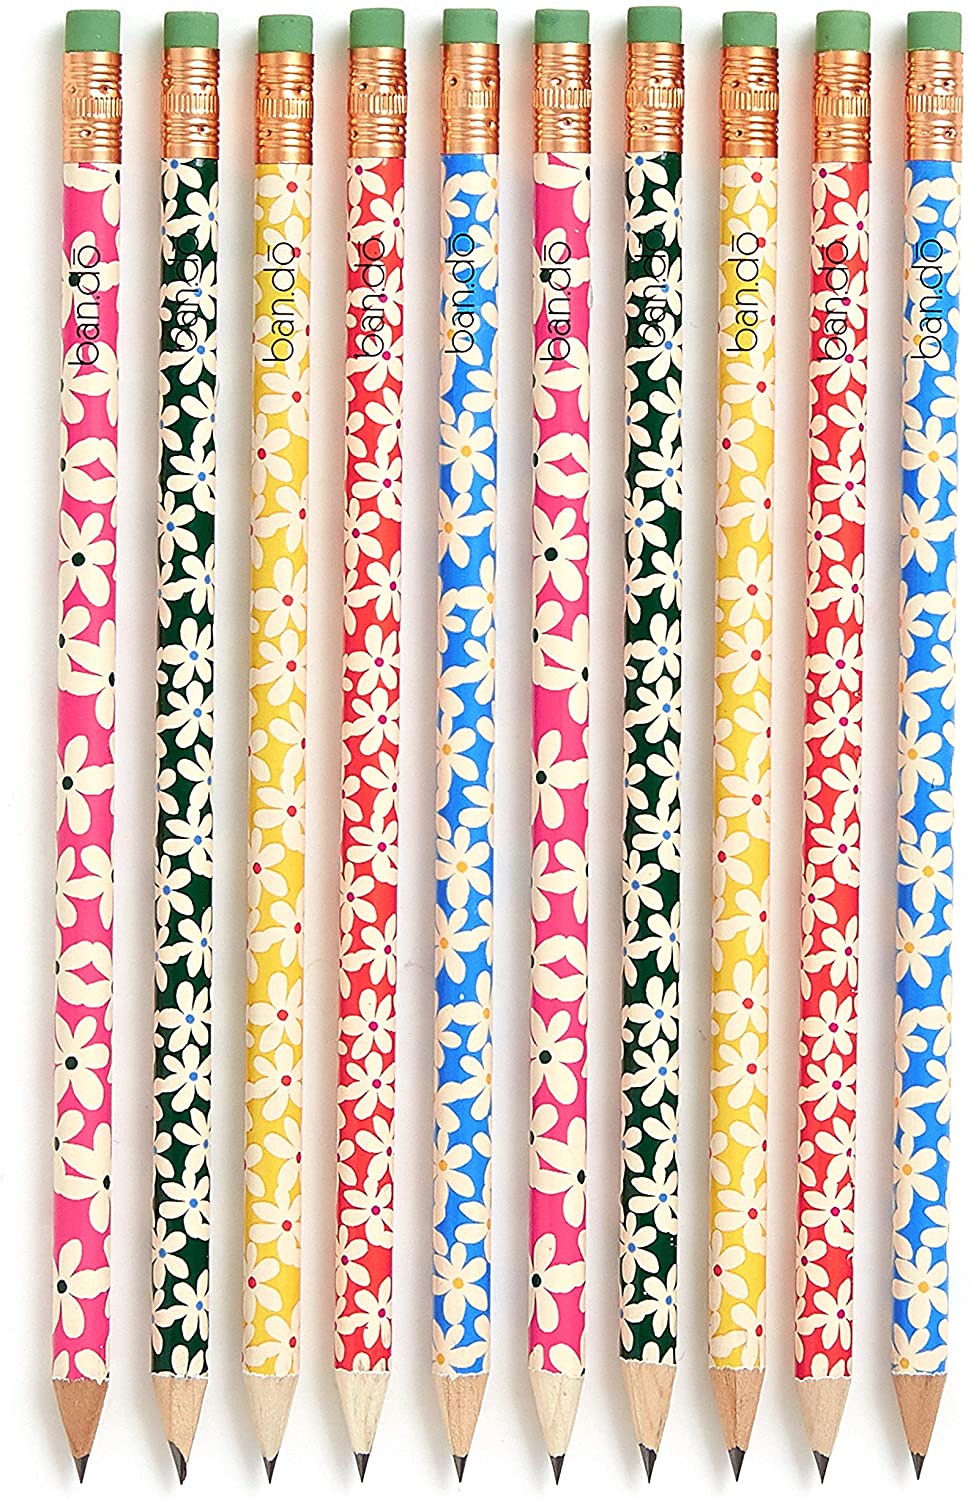 ban.do Pre-Sharpened Floral Print Pencils For Girls, 10-Count